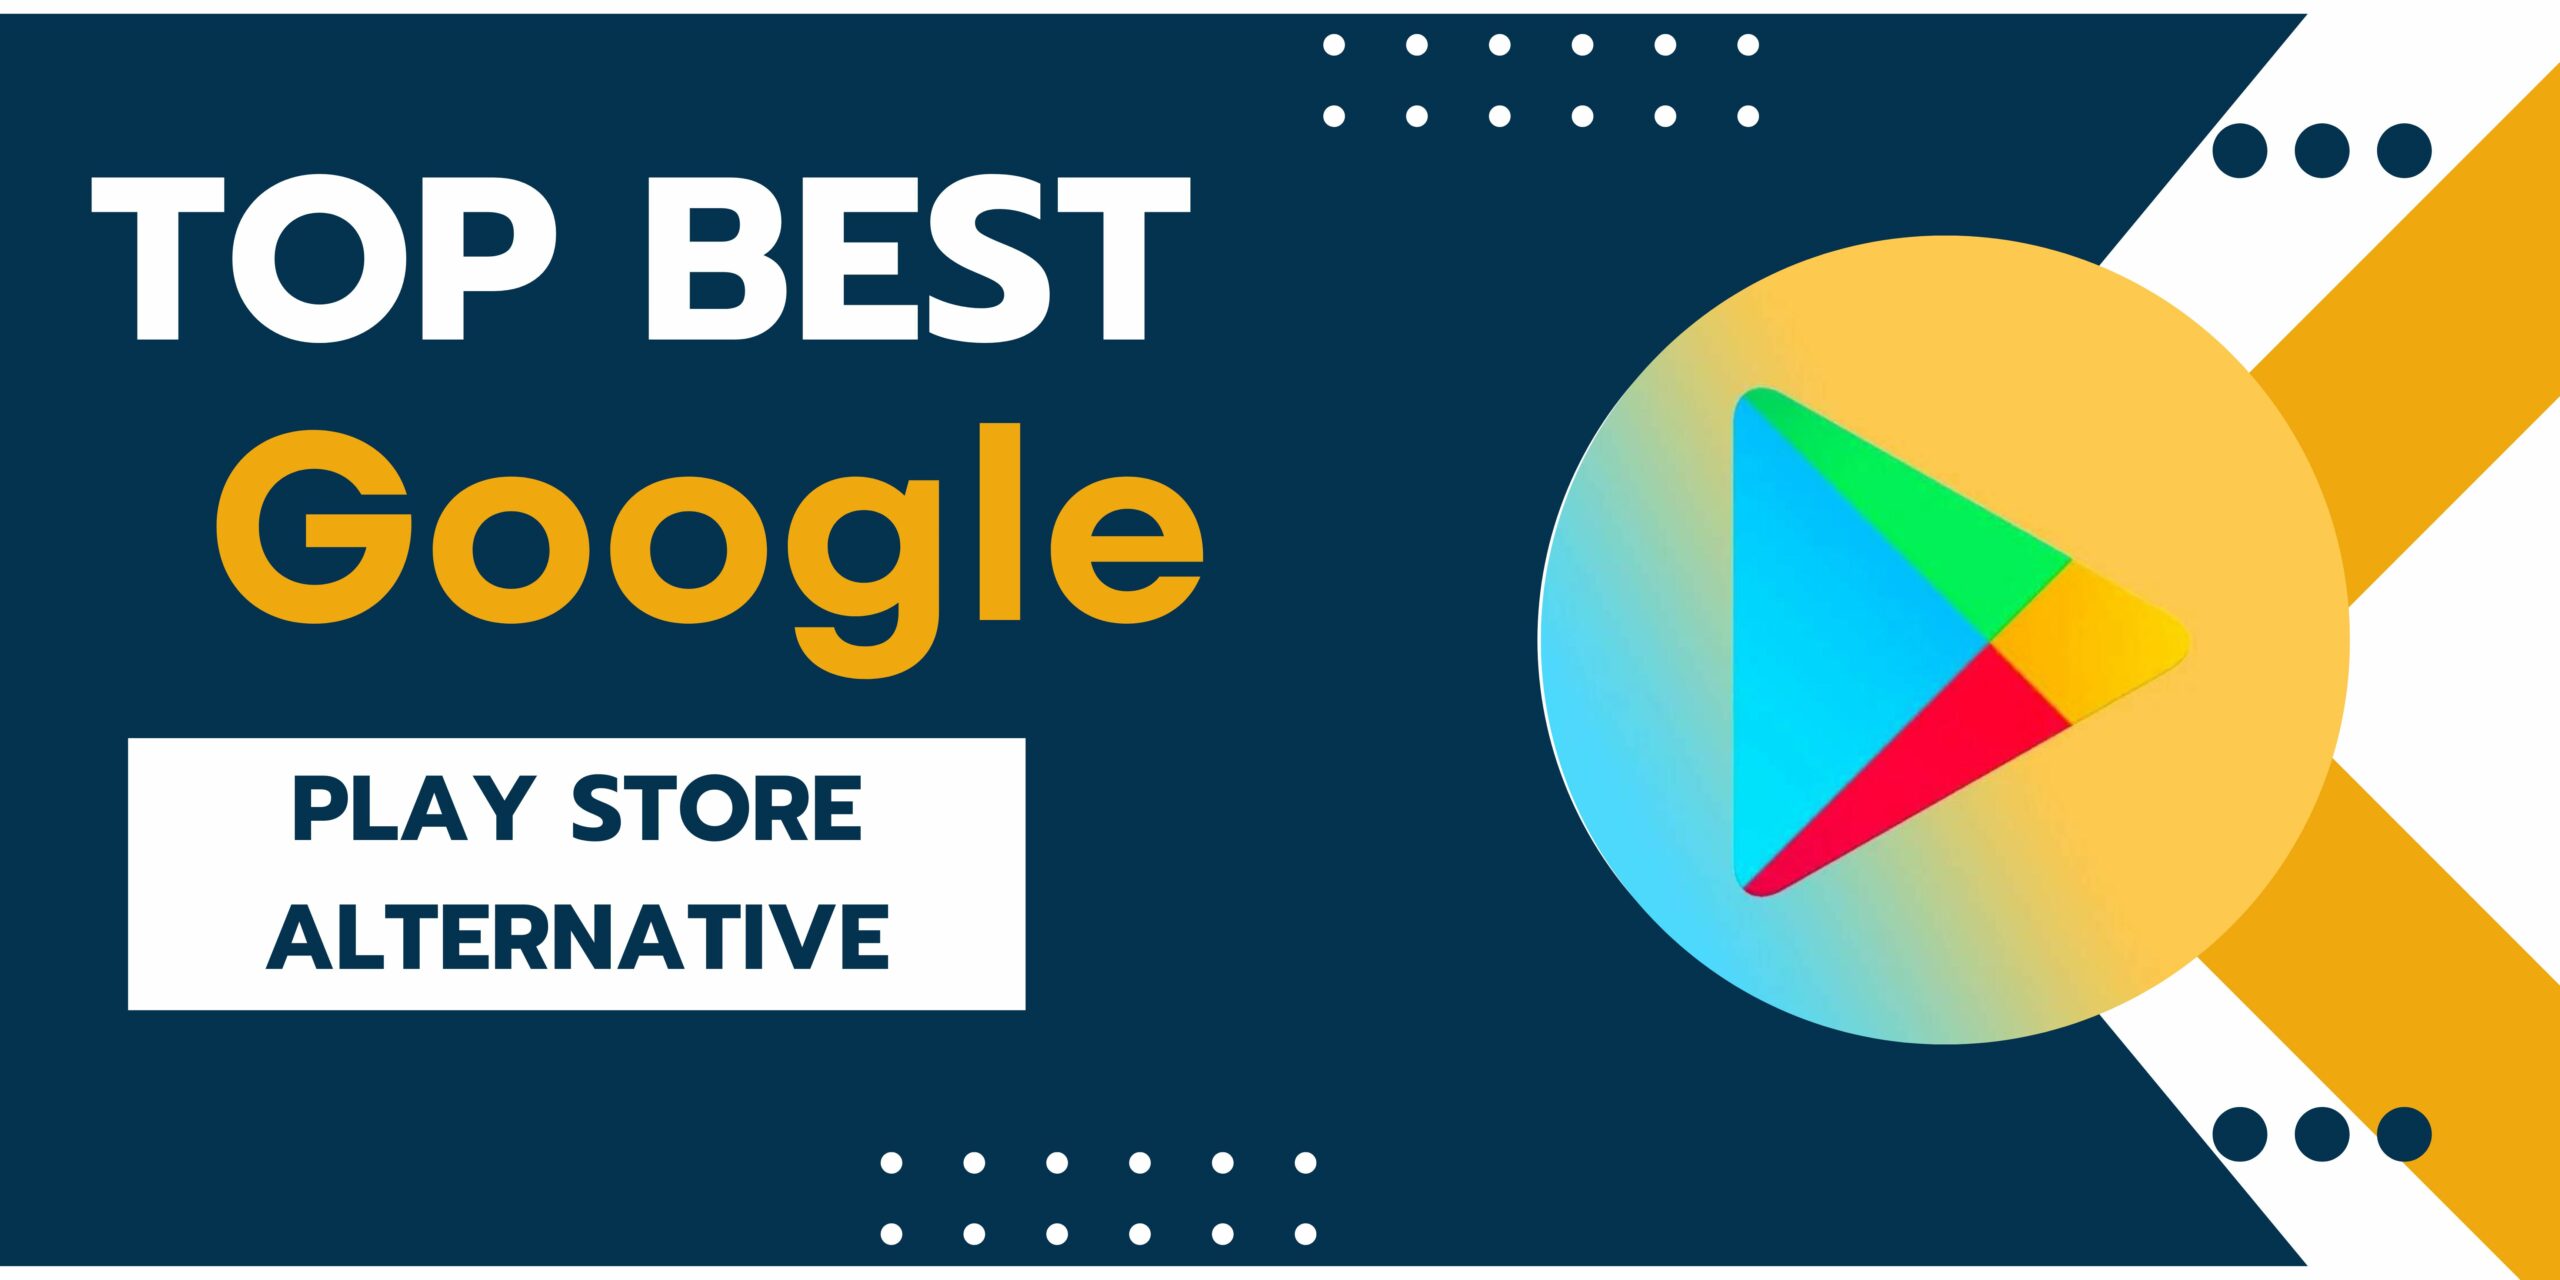 an image of Top Best Google Play Store Alternative